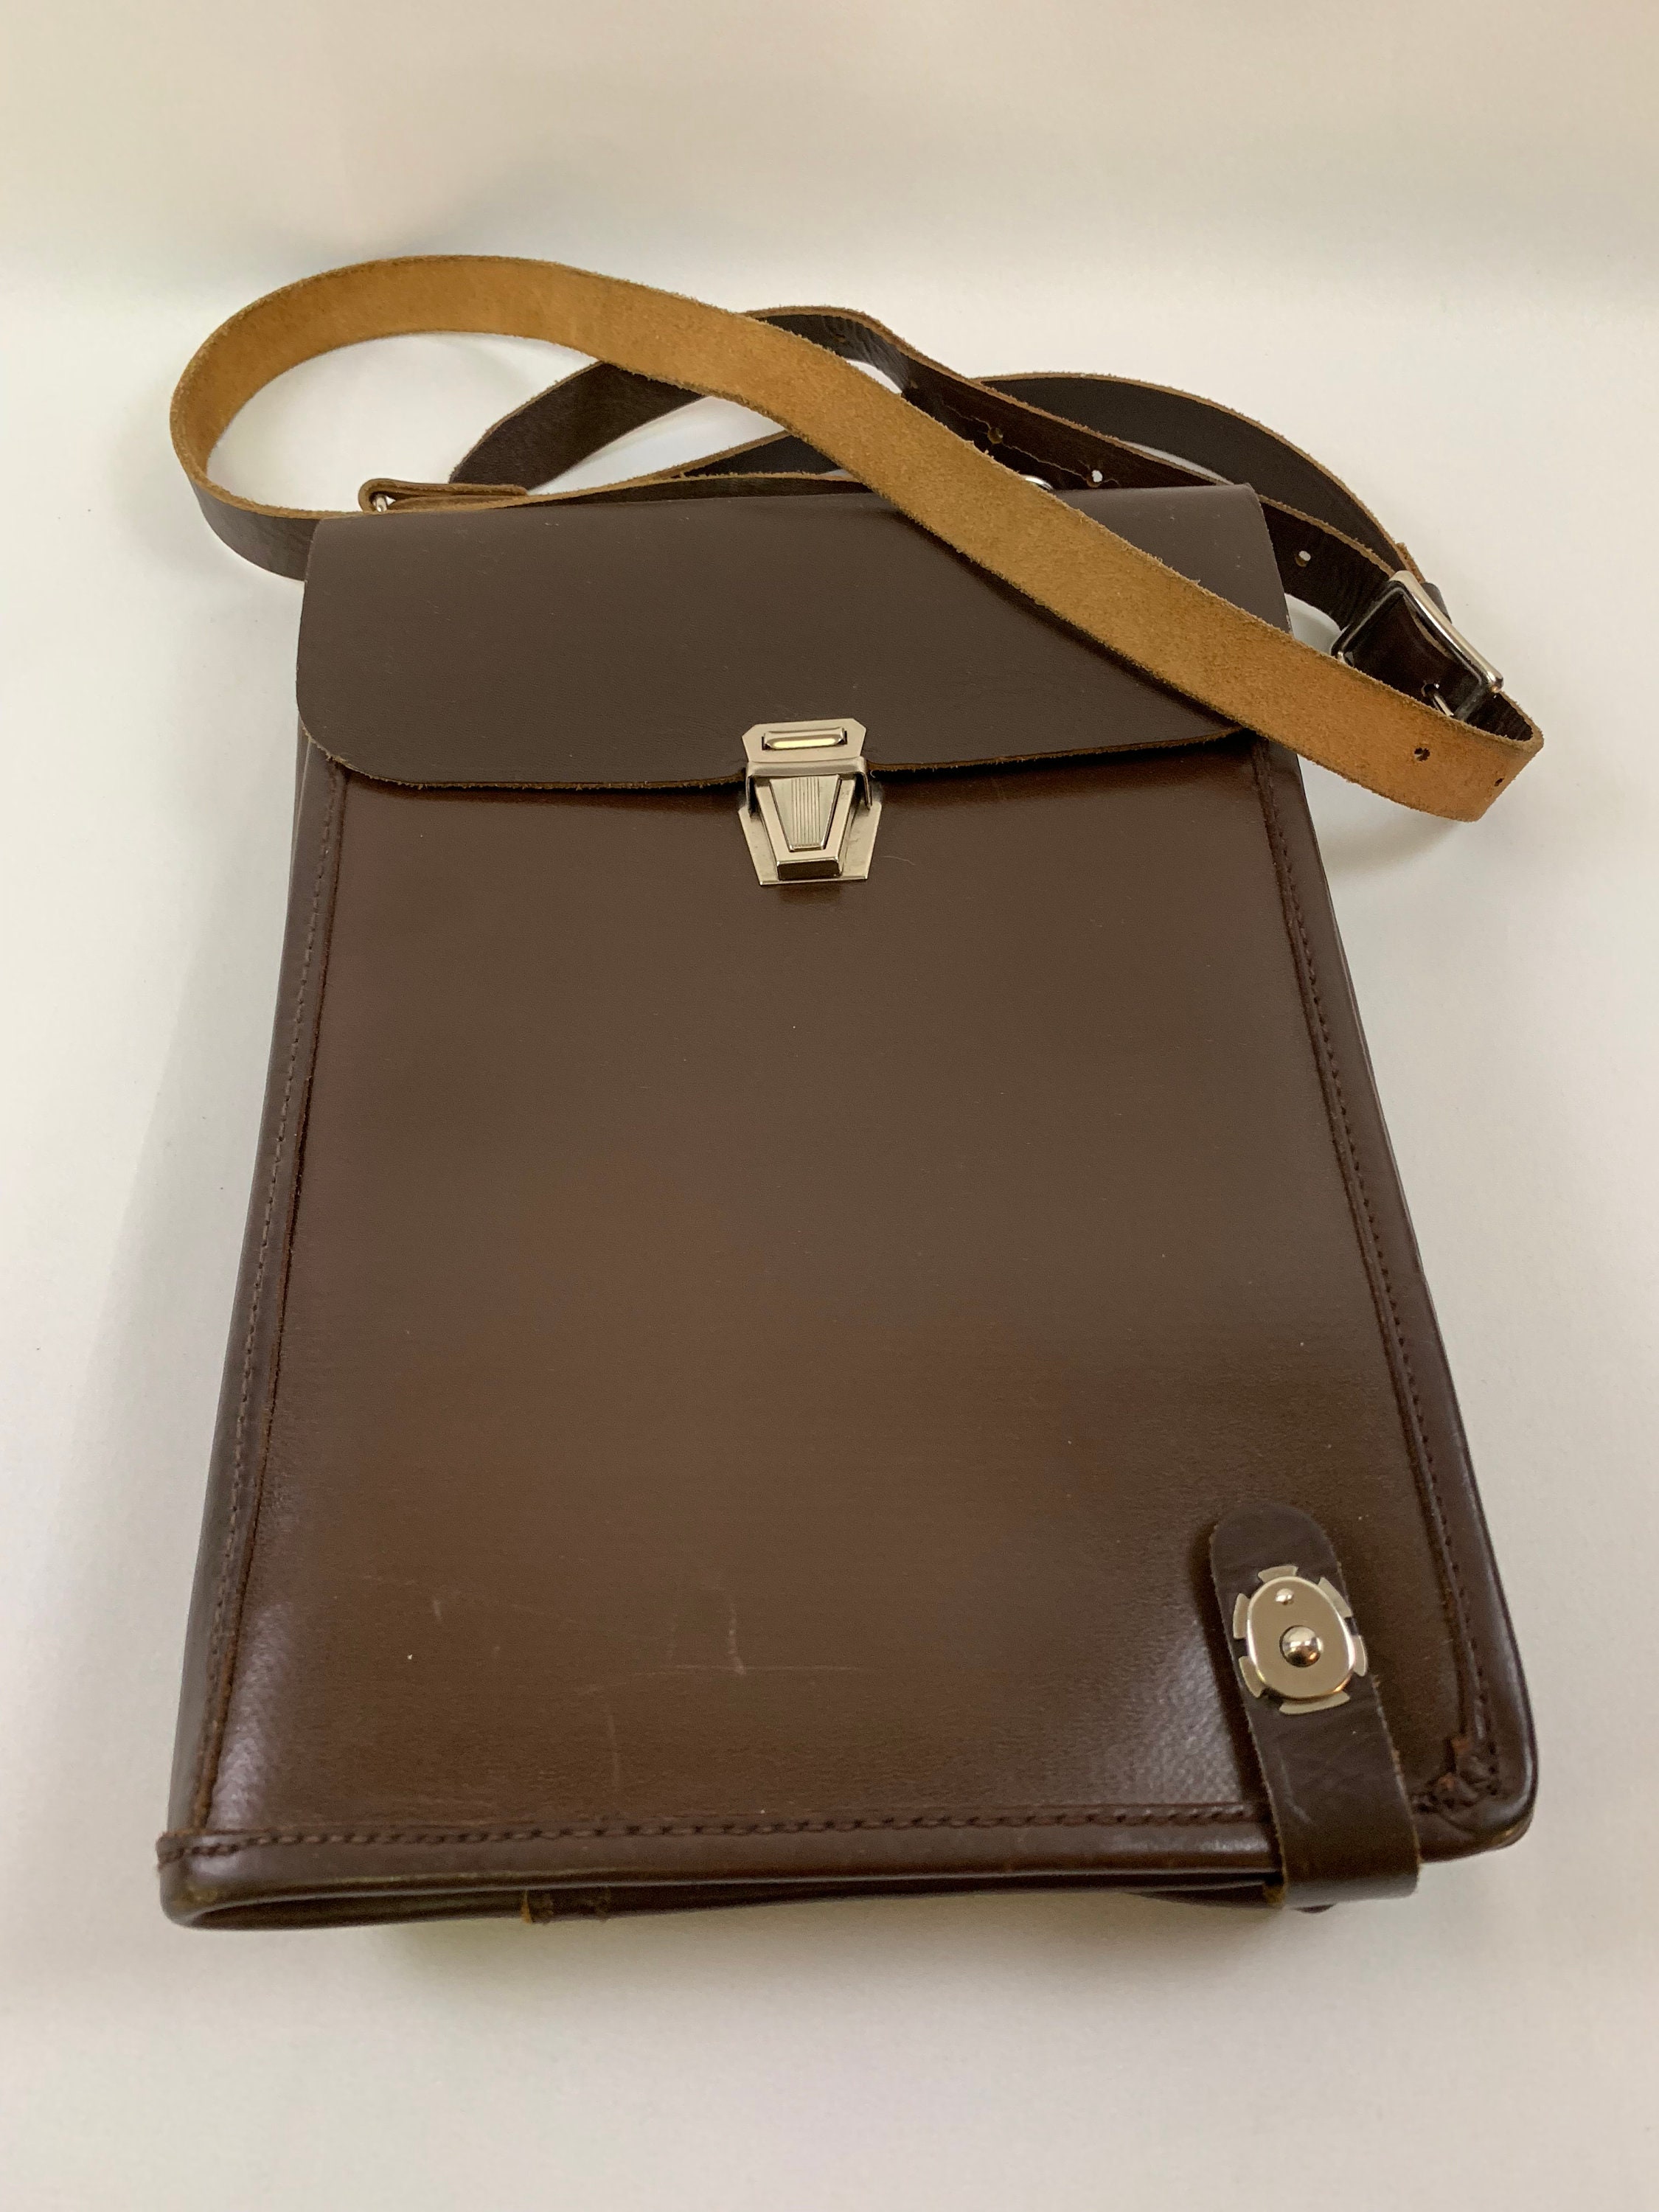 Franklin Covey Business Leather Laptop Bag Style#720905 By Heritage  Industries Length:17 Height:12 - Bags & Luggage, Facebook Marketplace